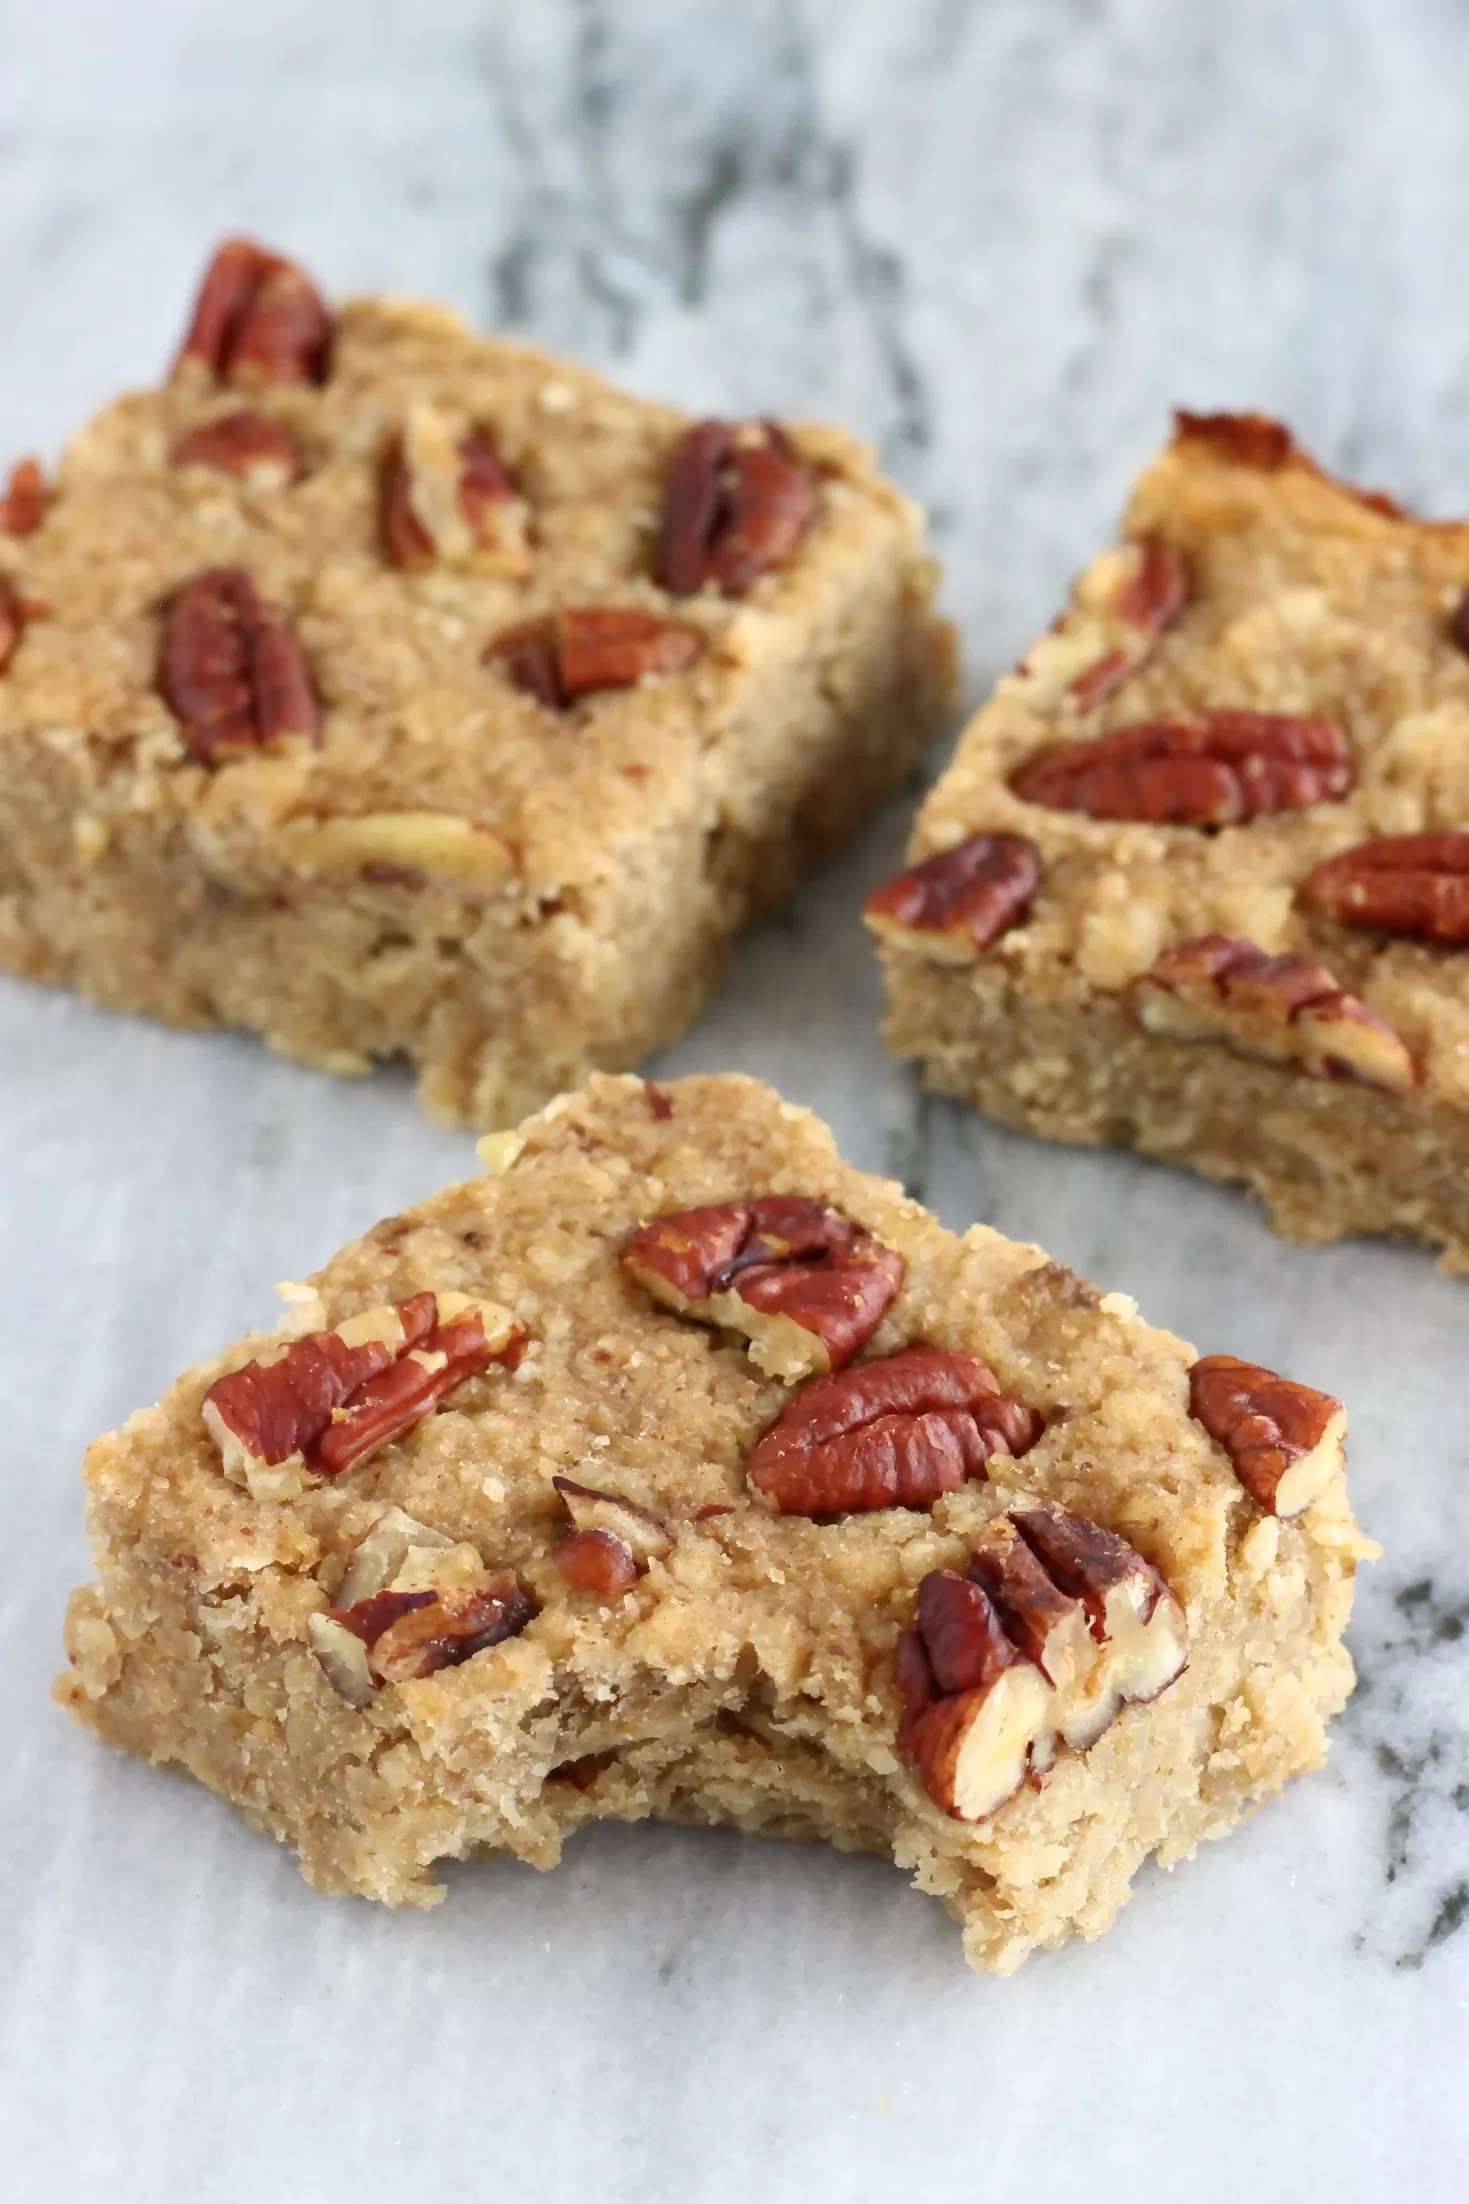 Three baked banana oatmeal bars topped with pecan nuts on a marble background, with a bite taken out of one